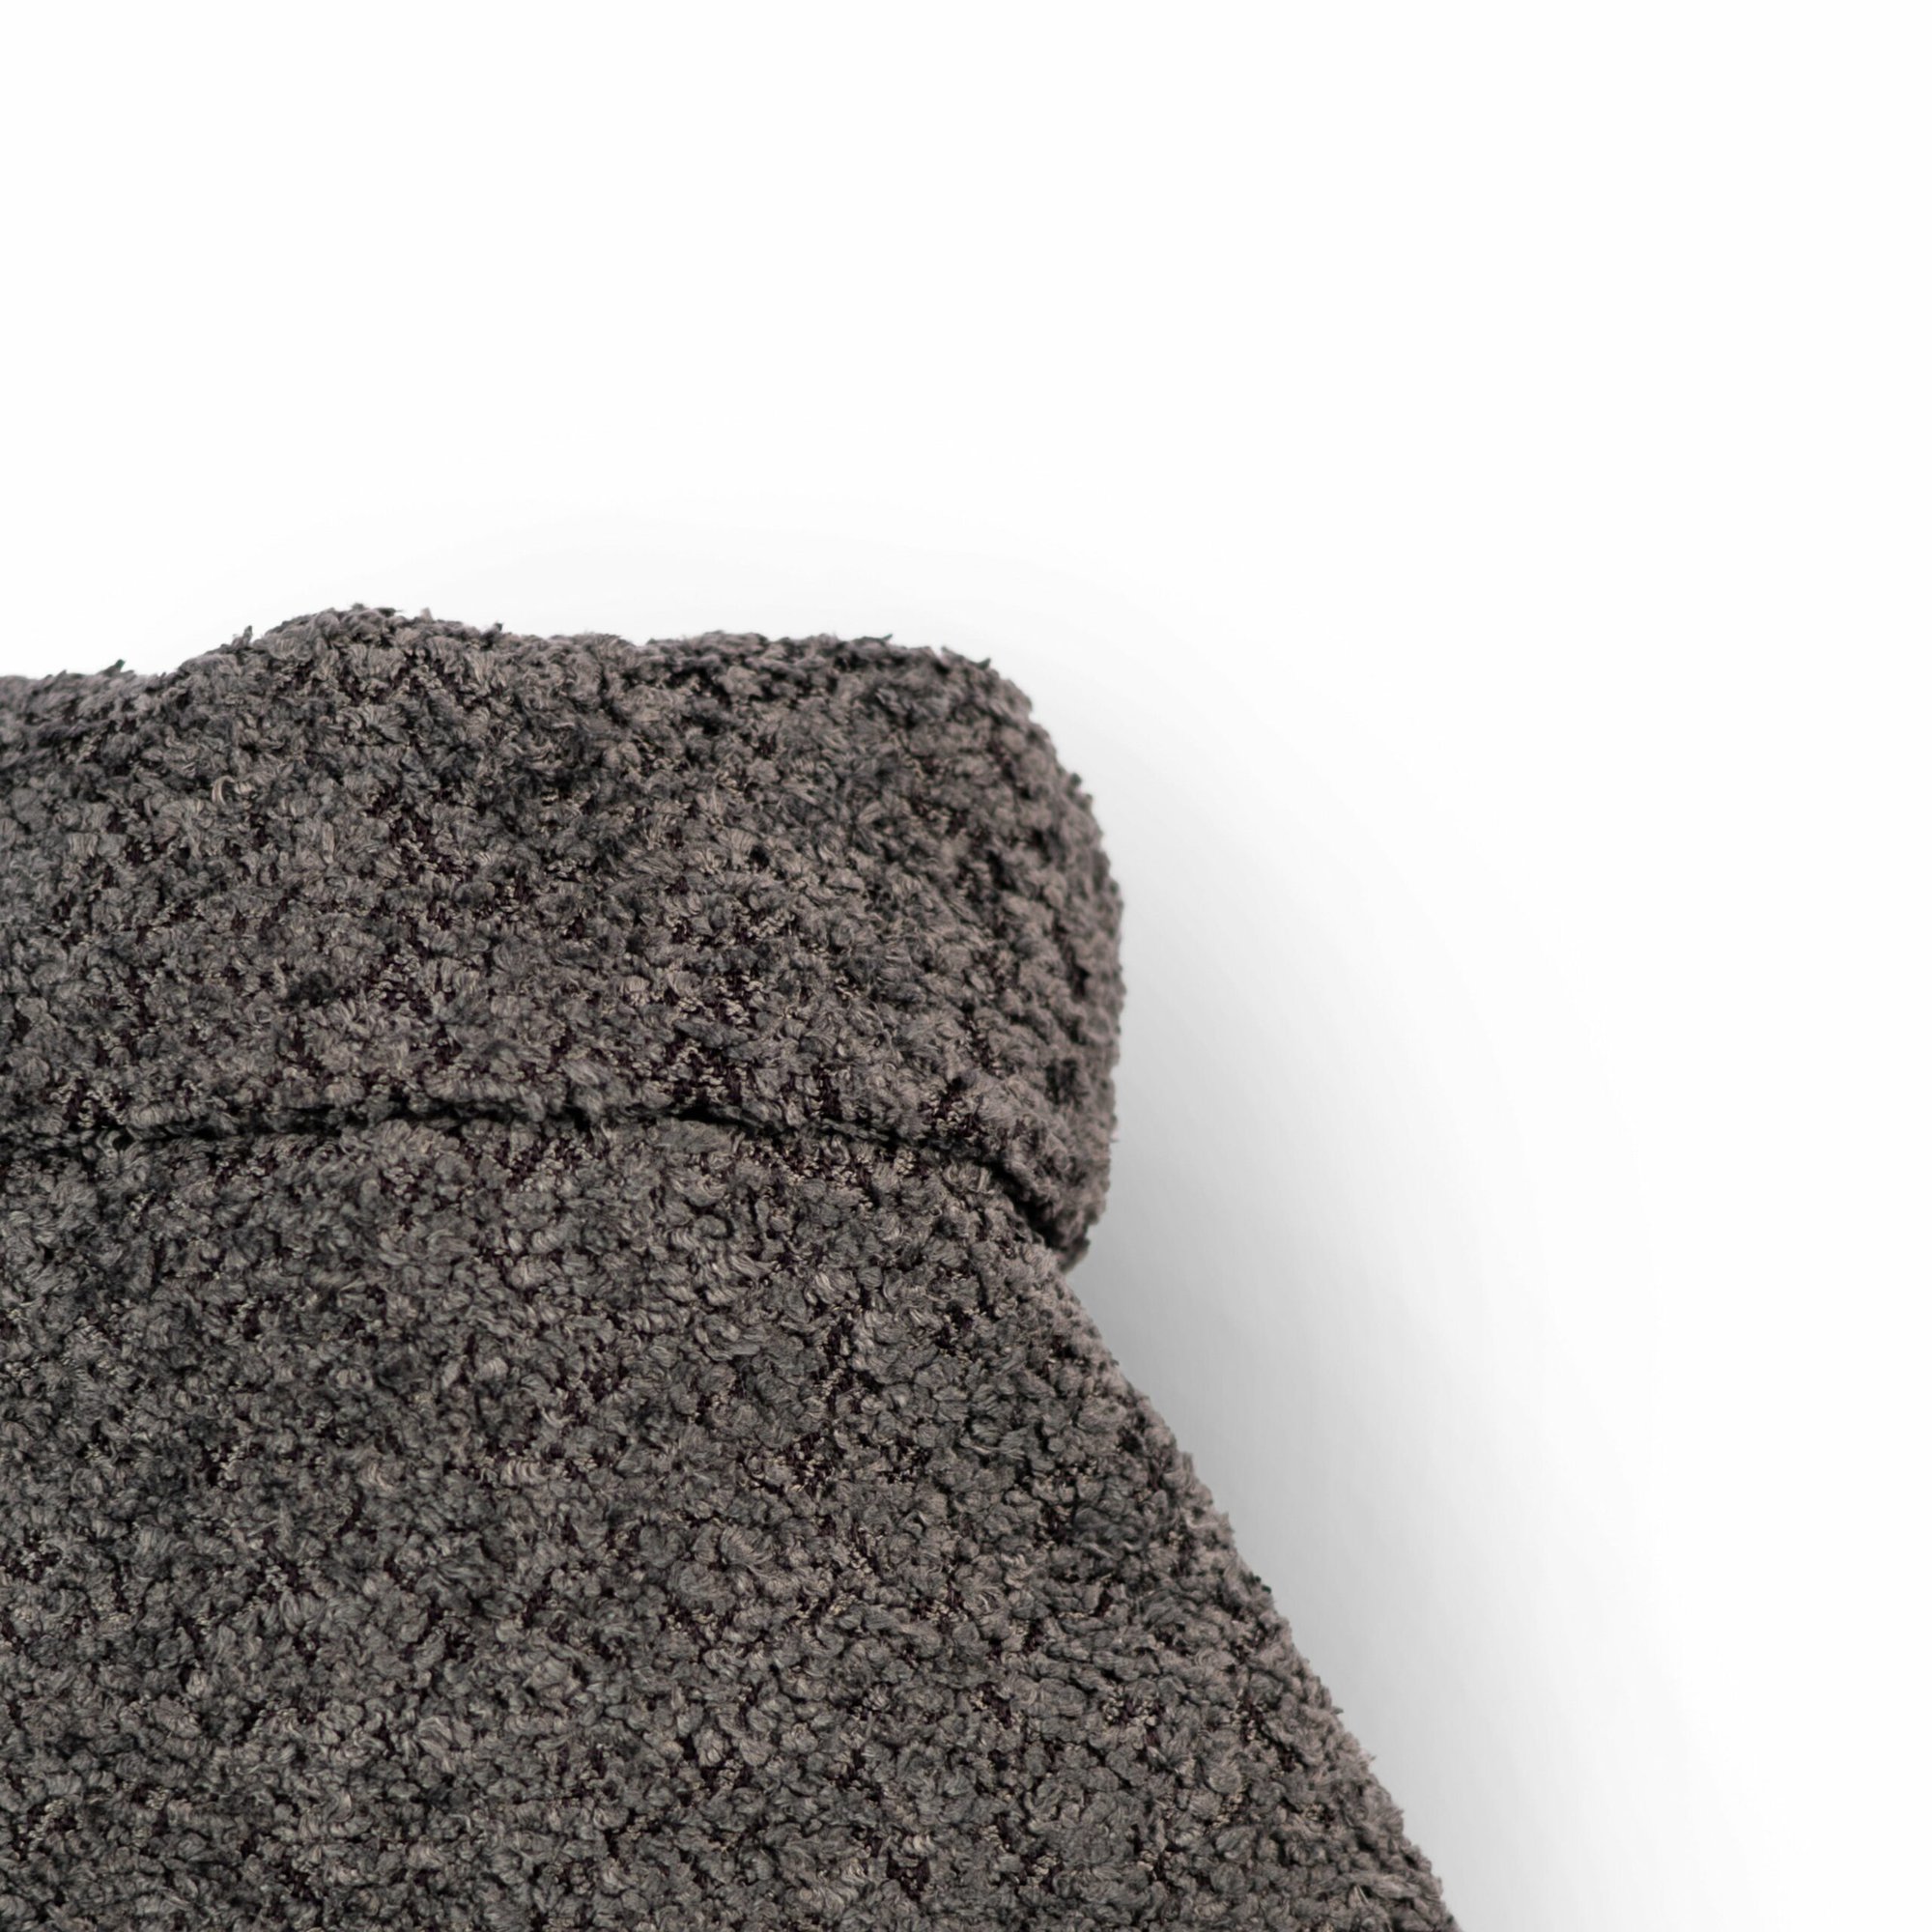 Graphite Fleece Hot Water Bottle - Made From Recycled Plastic